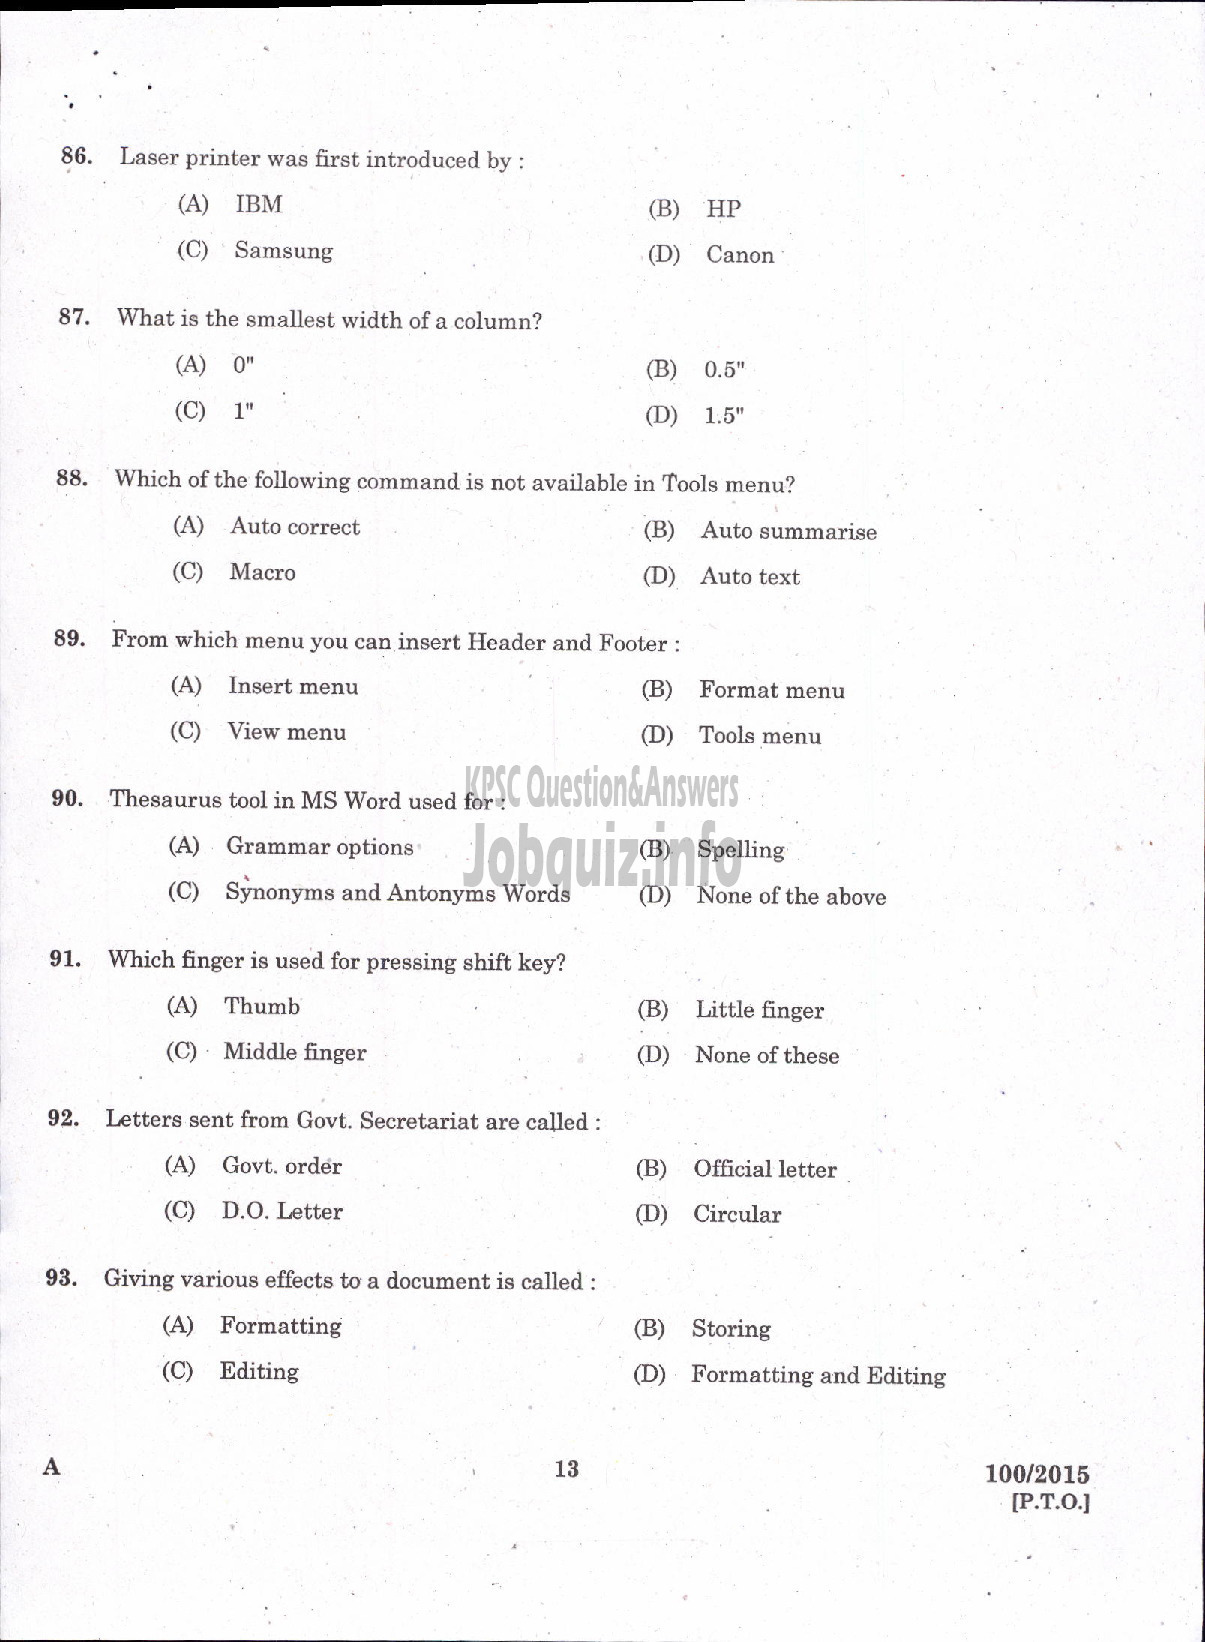 Kerala PSC Question Paper - TYYPIST GRADE II / STENO TYPIST / CLERK TYPIST / TYPIST KERALA STATE HOUSING BOARD / KERALA SHIPPING AND INLAND NAVIGATION CORP LTD / VARIOUS / KERALA ELECTRICAL AND ALLIED ENGINEERING COMPANY LTD-11